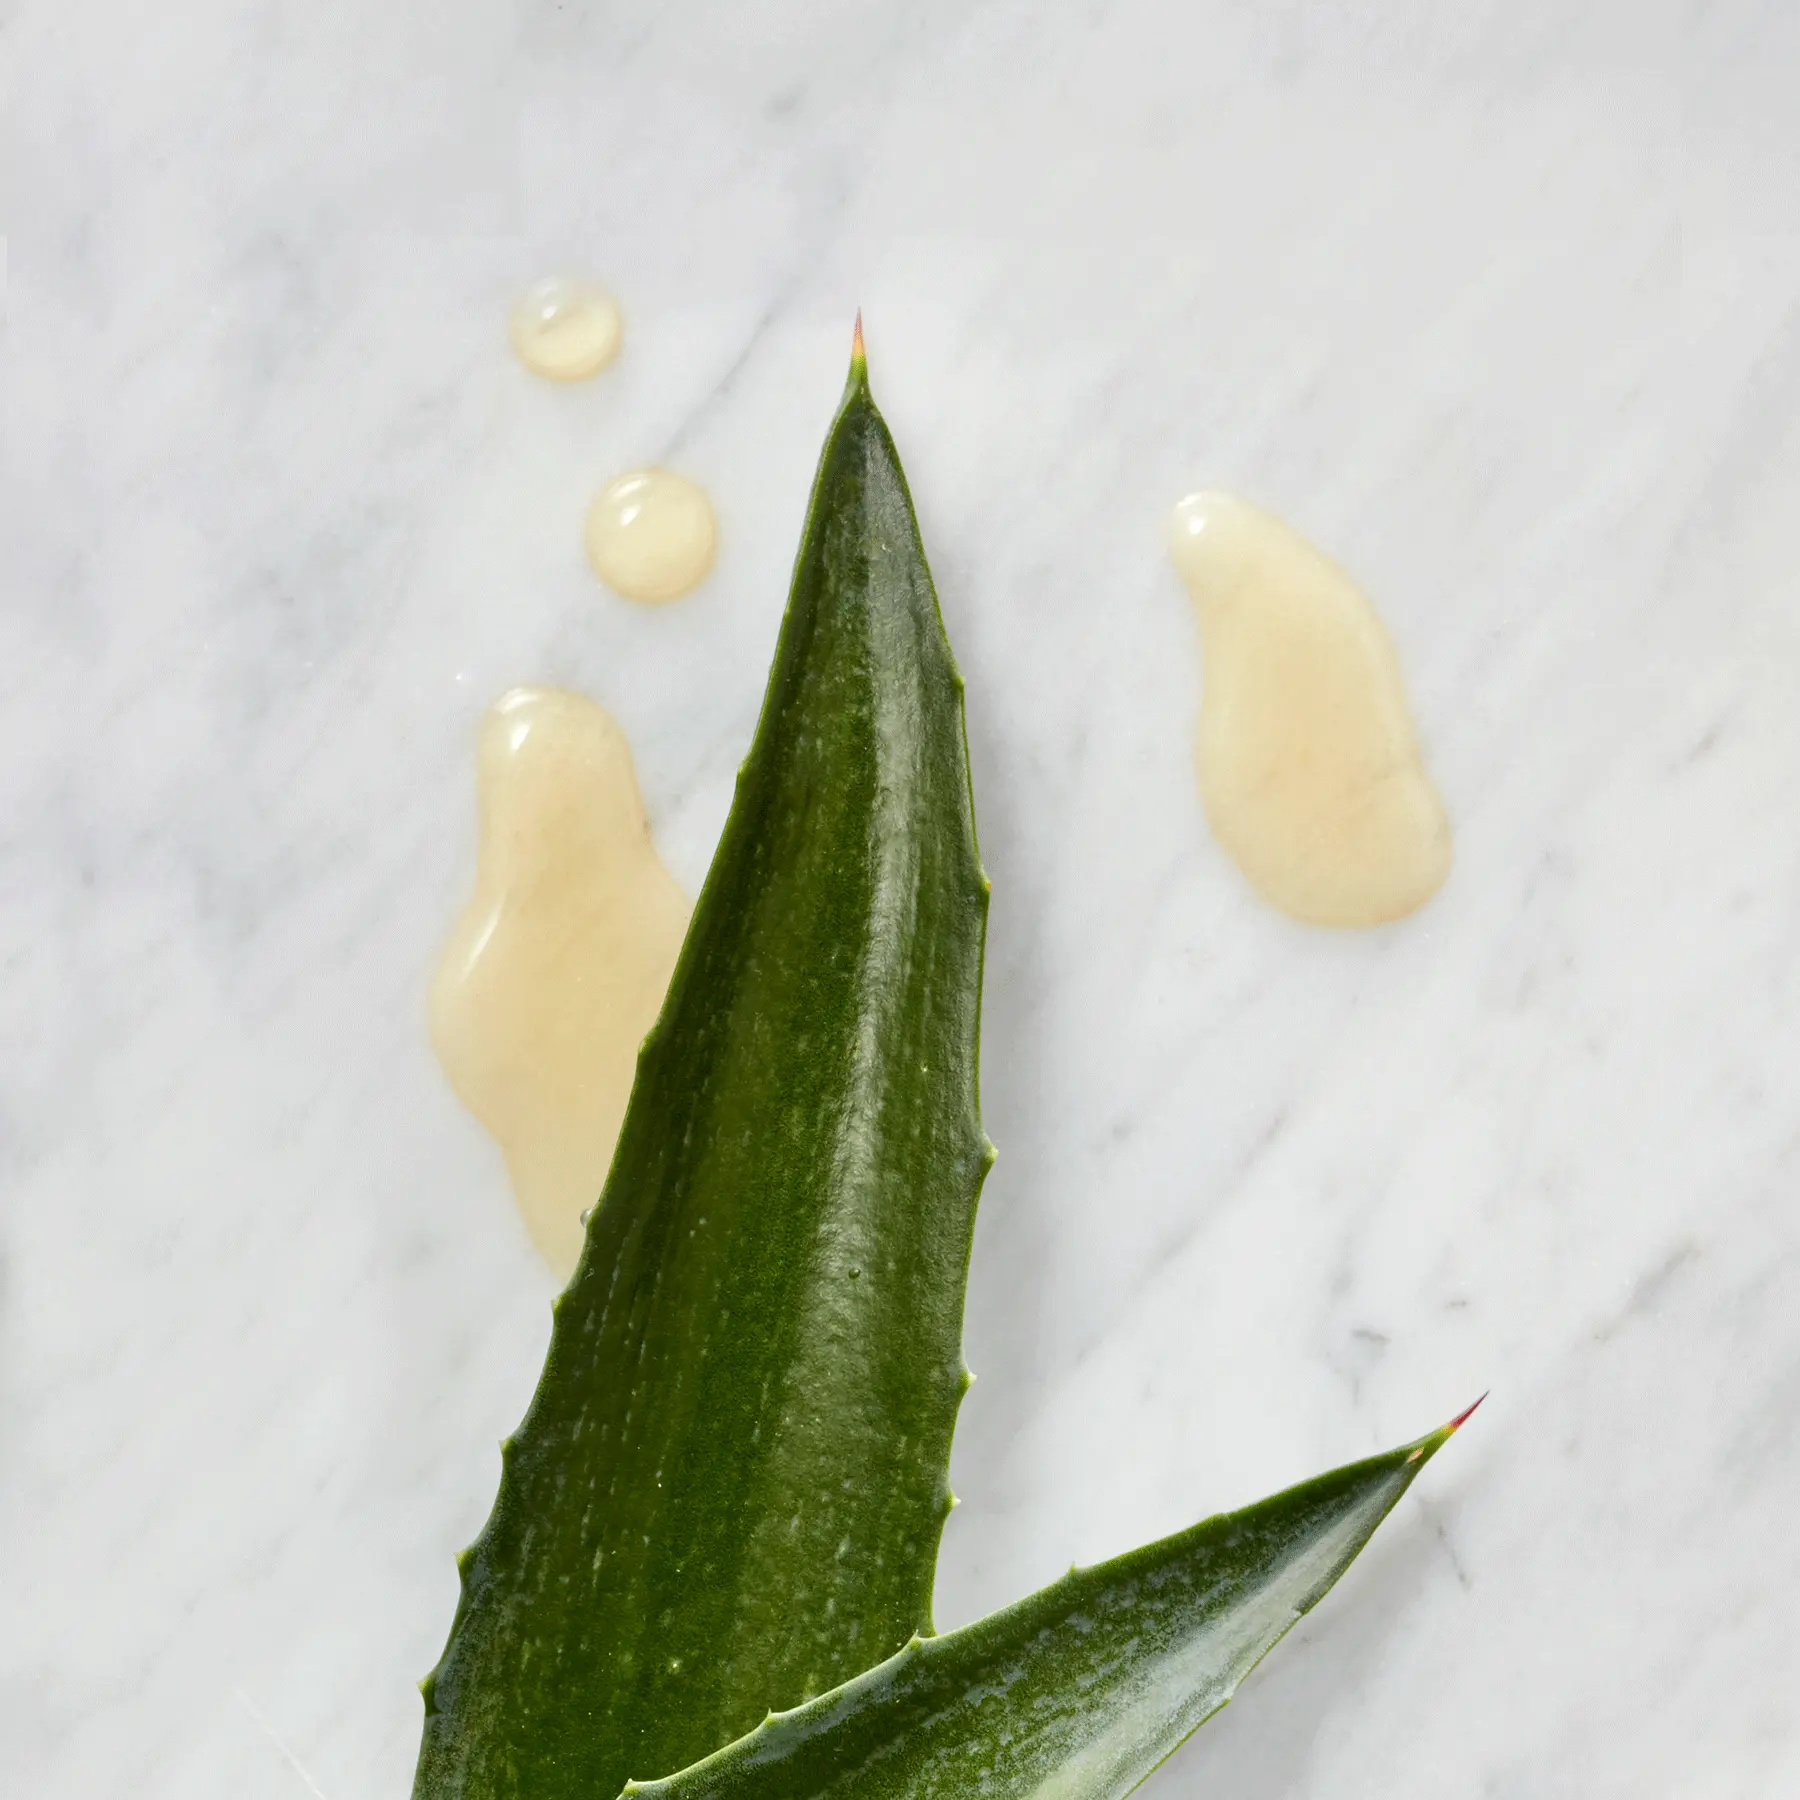 An agave leaf with agave syrup, which is helpful in soothing coughs associated with dry throat